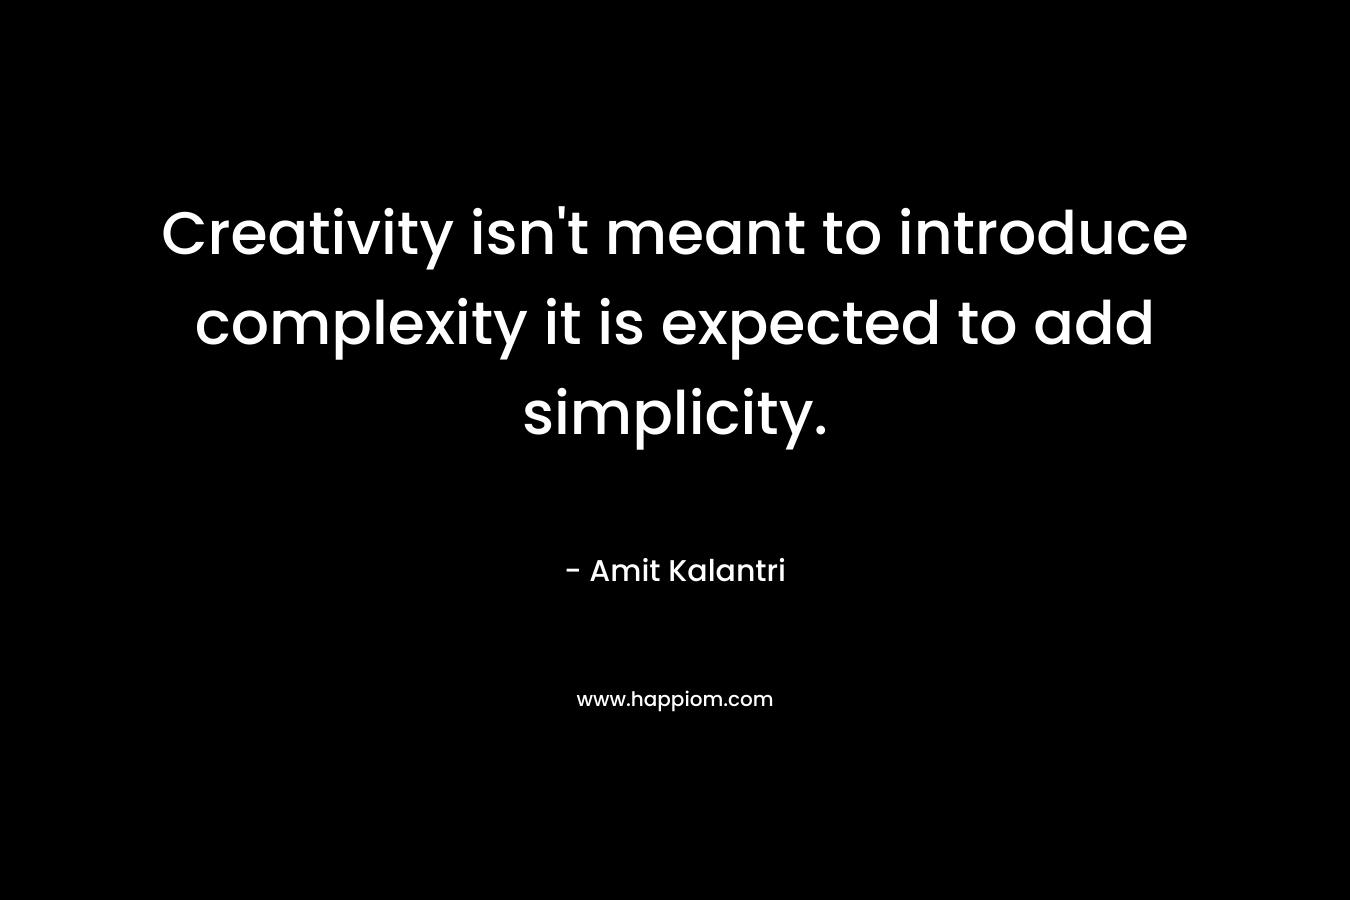 Creativity isn't meant to introduce complexity it is expected to add simplicity.